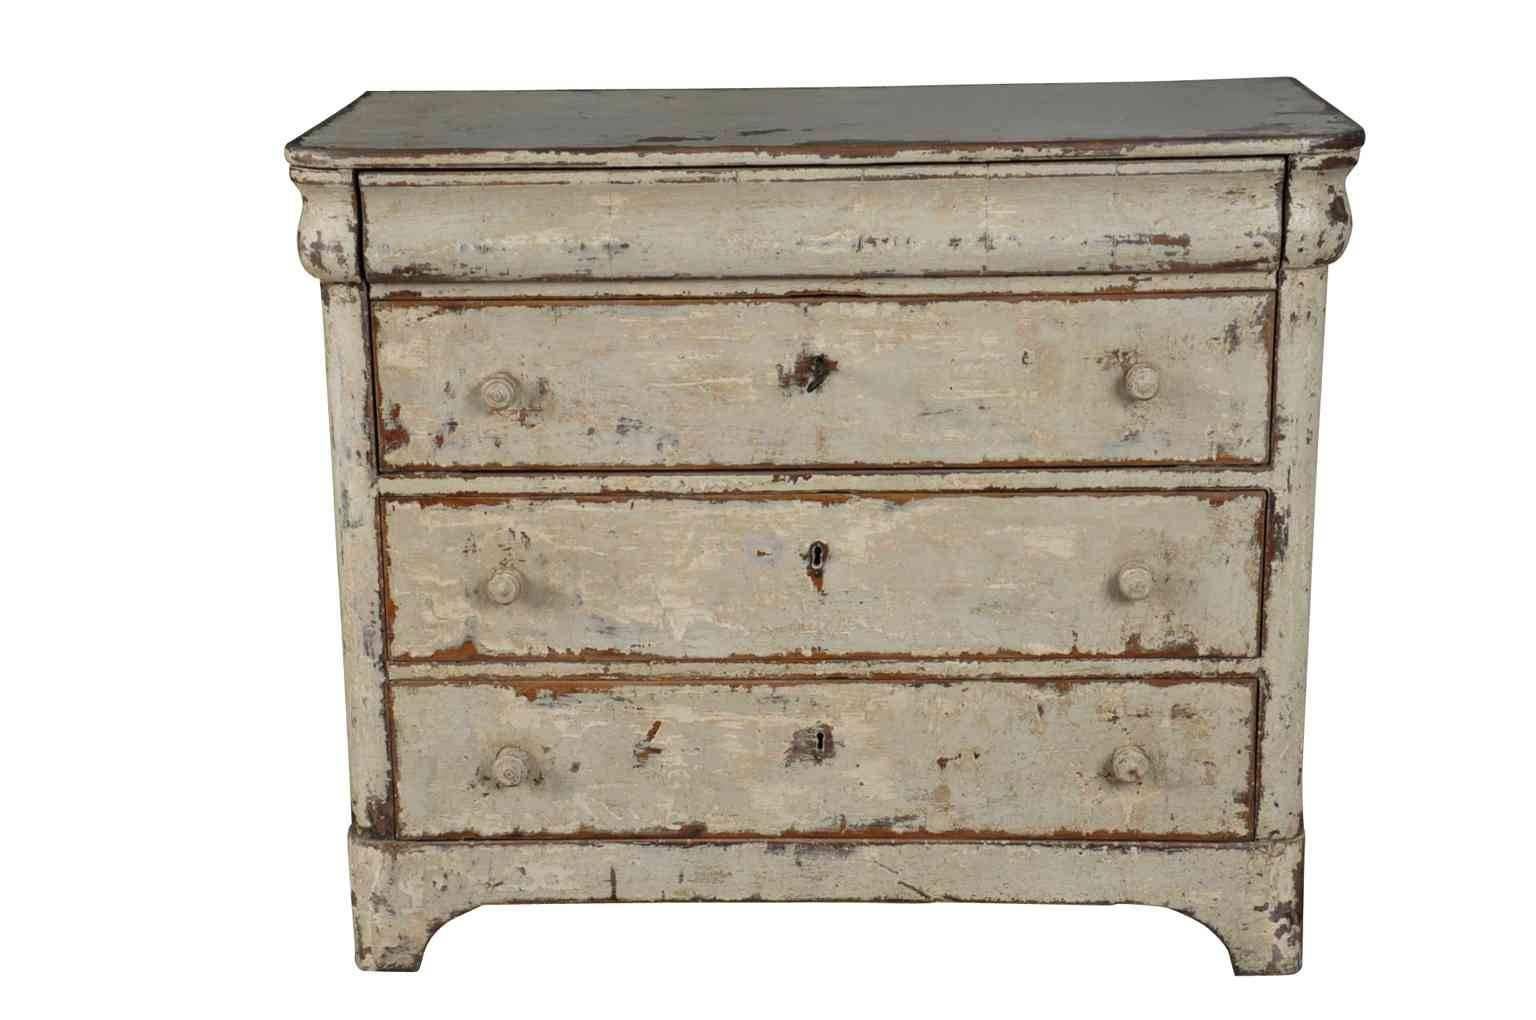 A very charming early 19th century painted commode from Northern Italy. Terrific finish and texture.